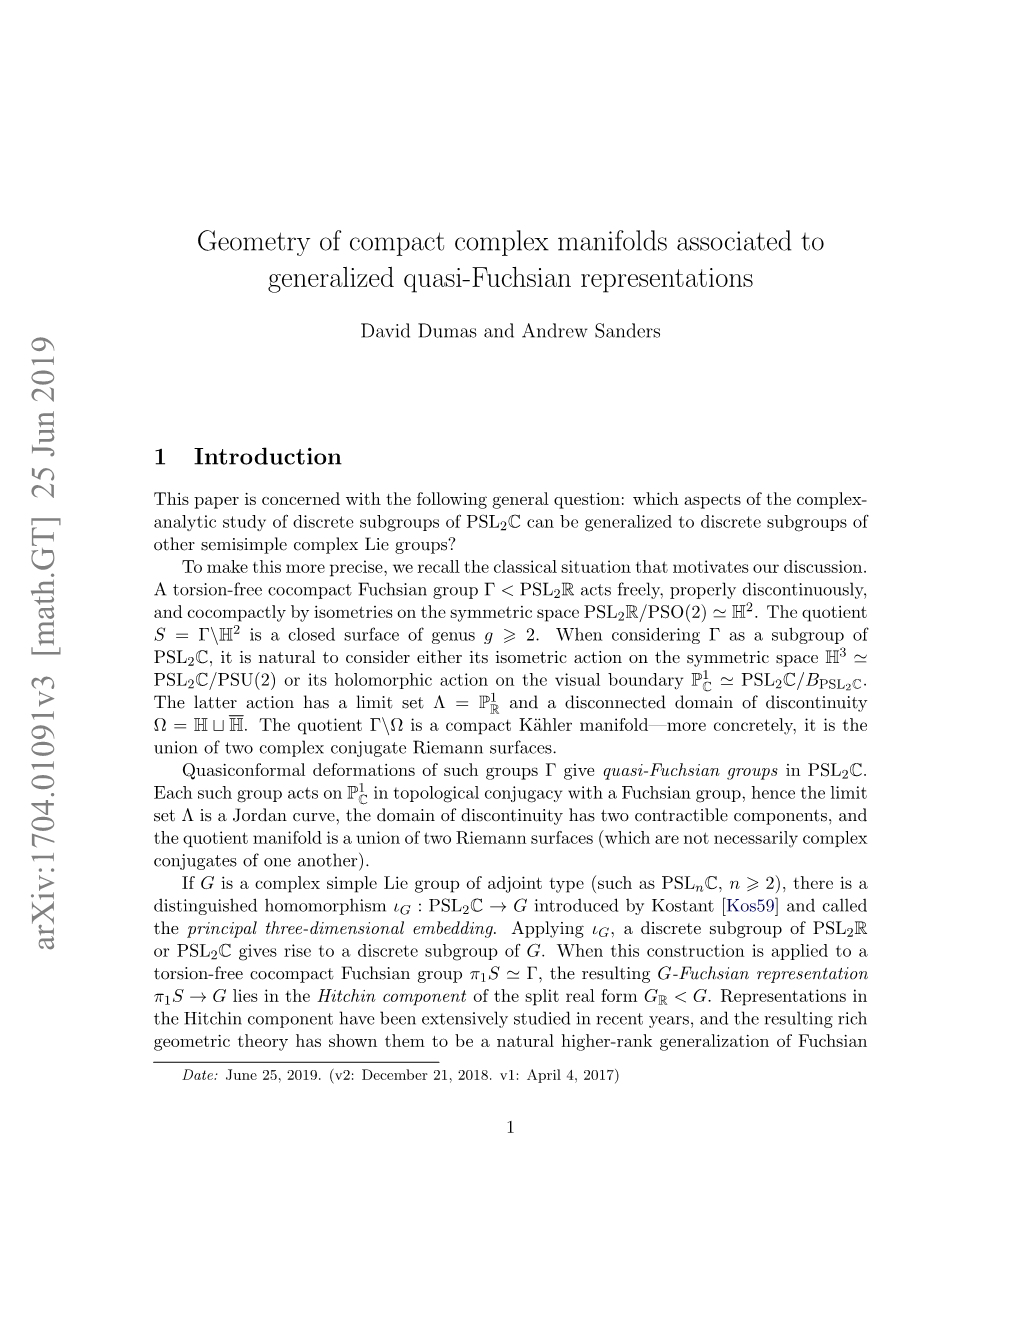 Geometry of Compact Complex Manifolds Associated to Generalized Quasi-Fuchsian Representations